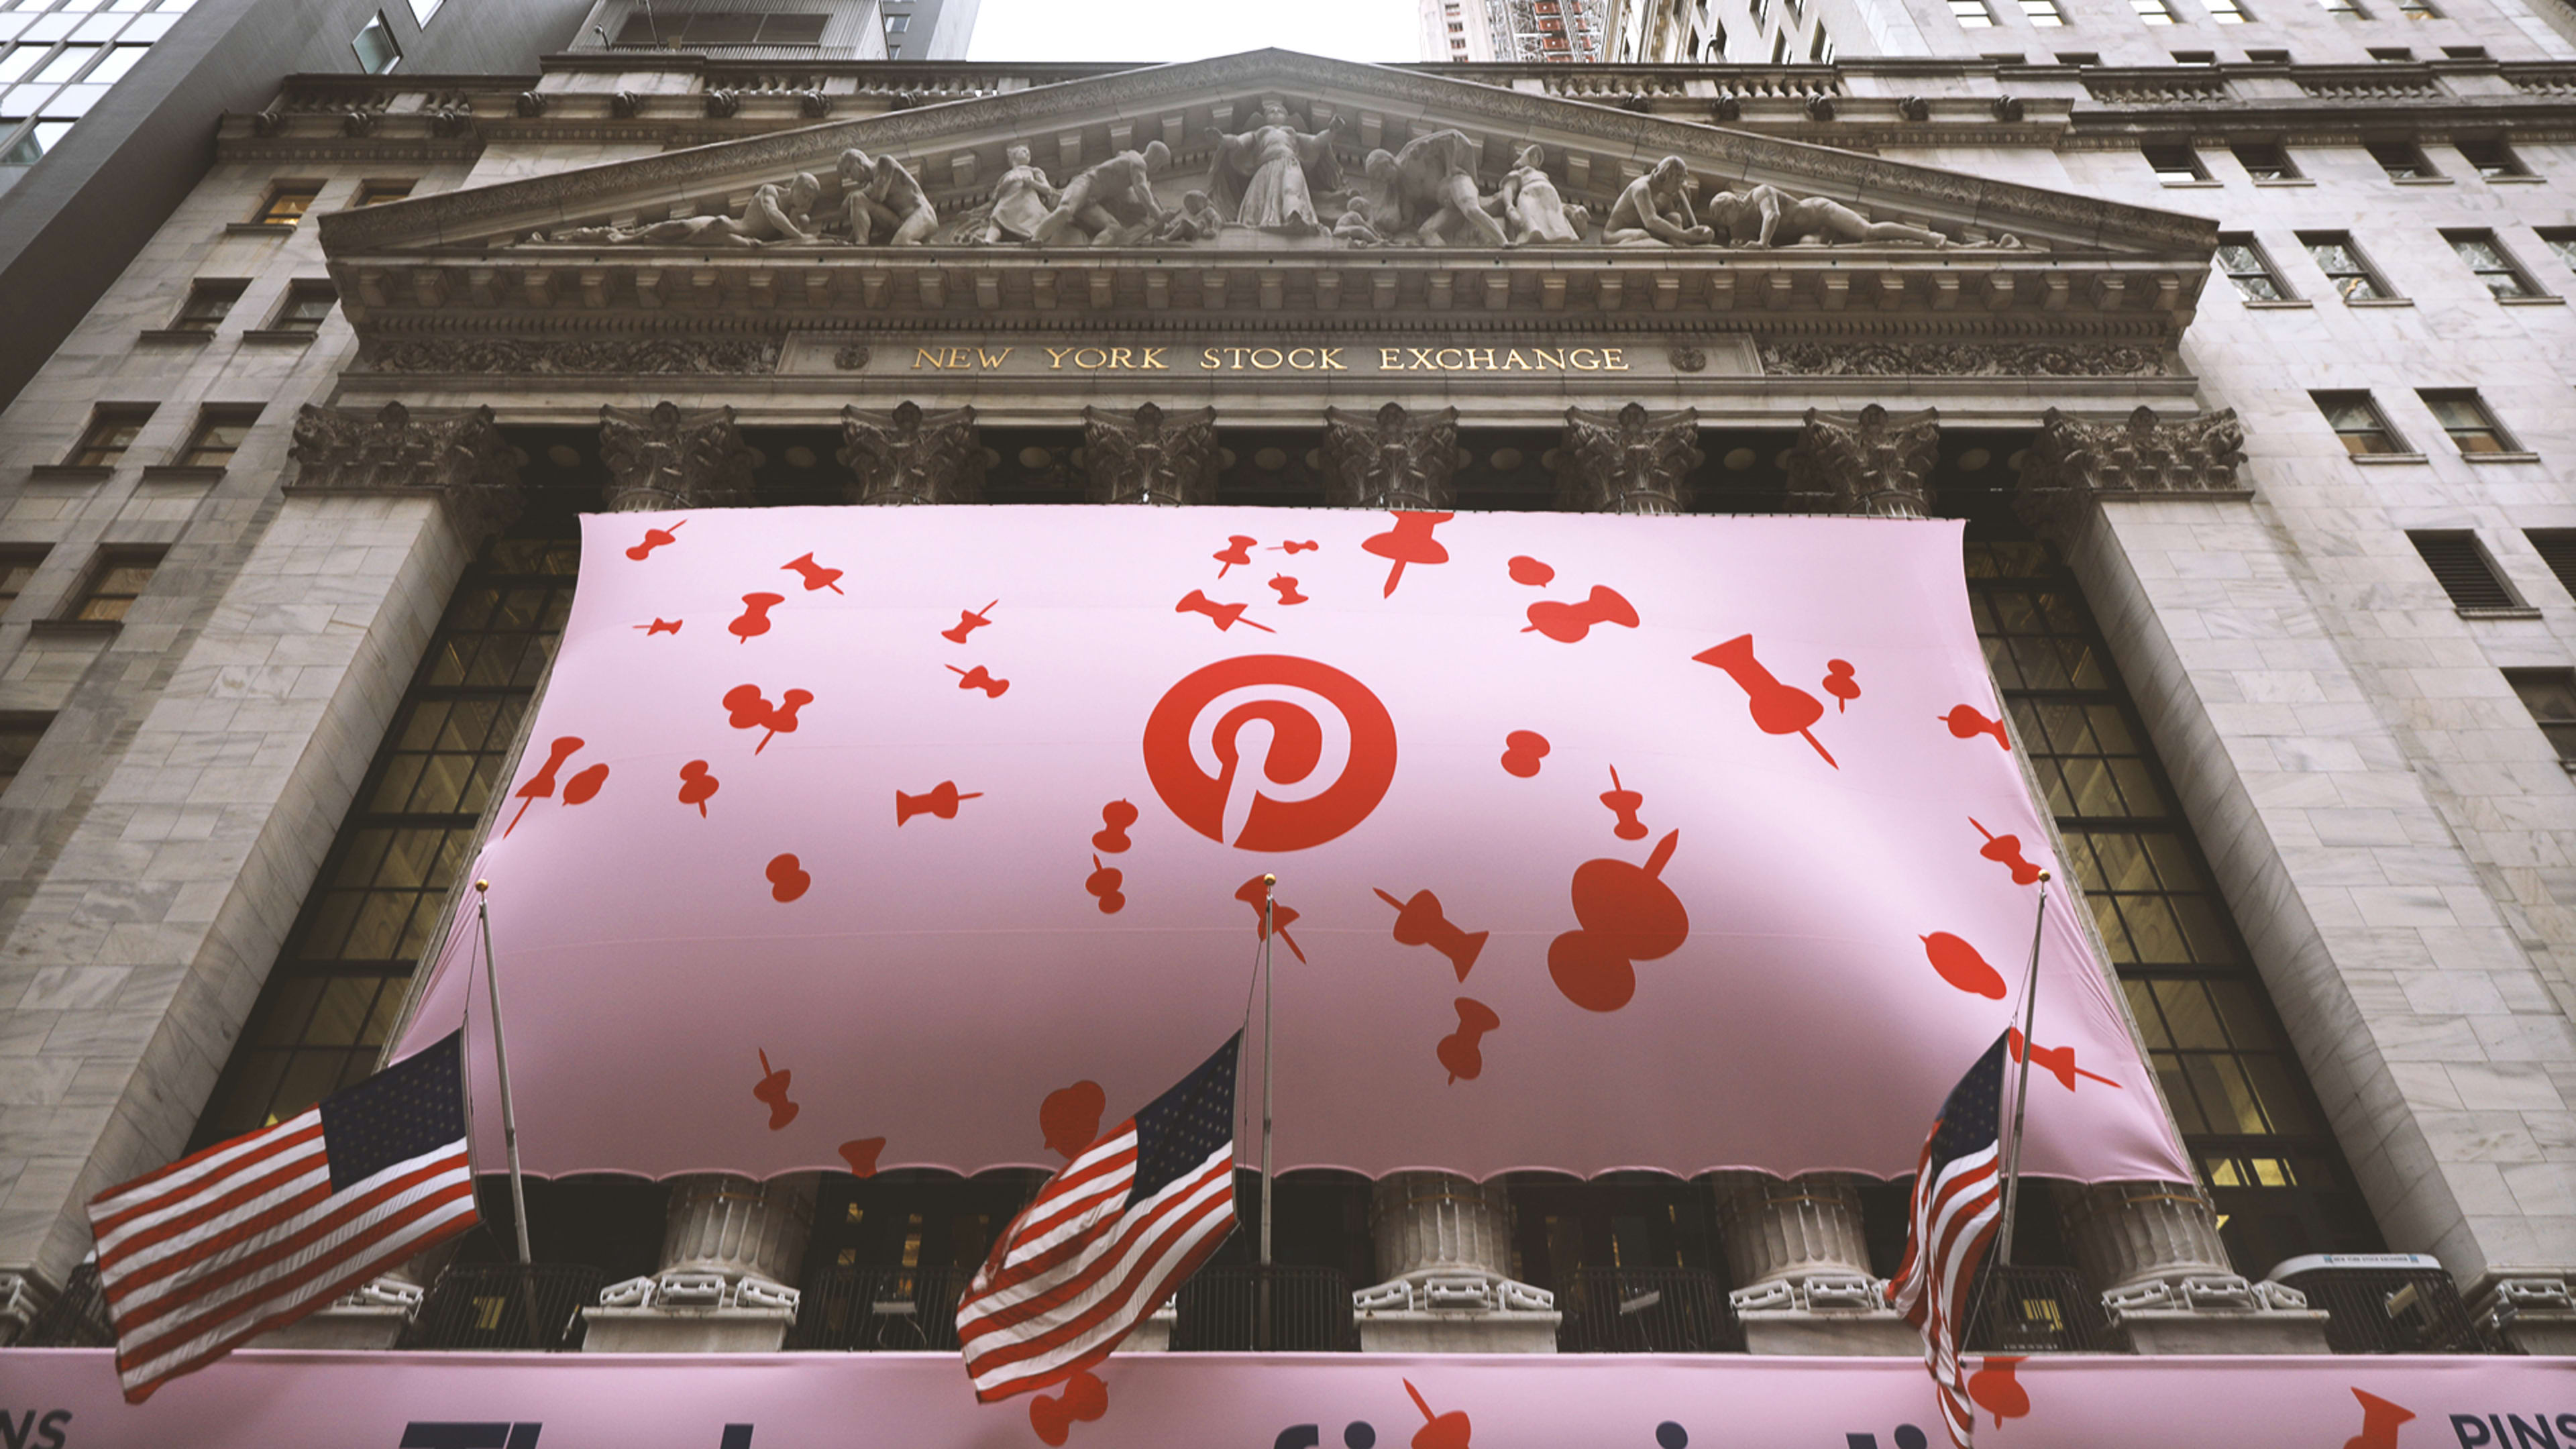 Pinterest stock plummets after its first earnings report comes up short